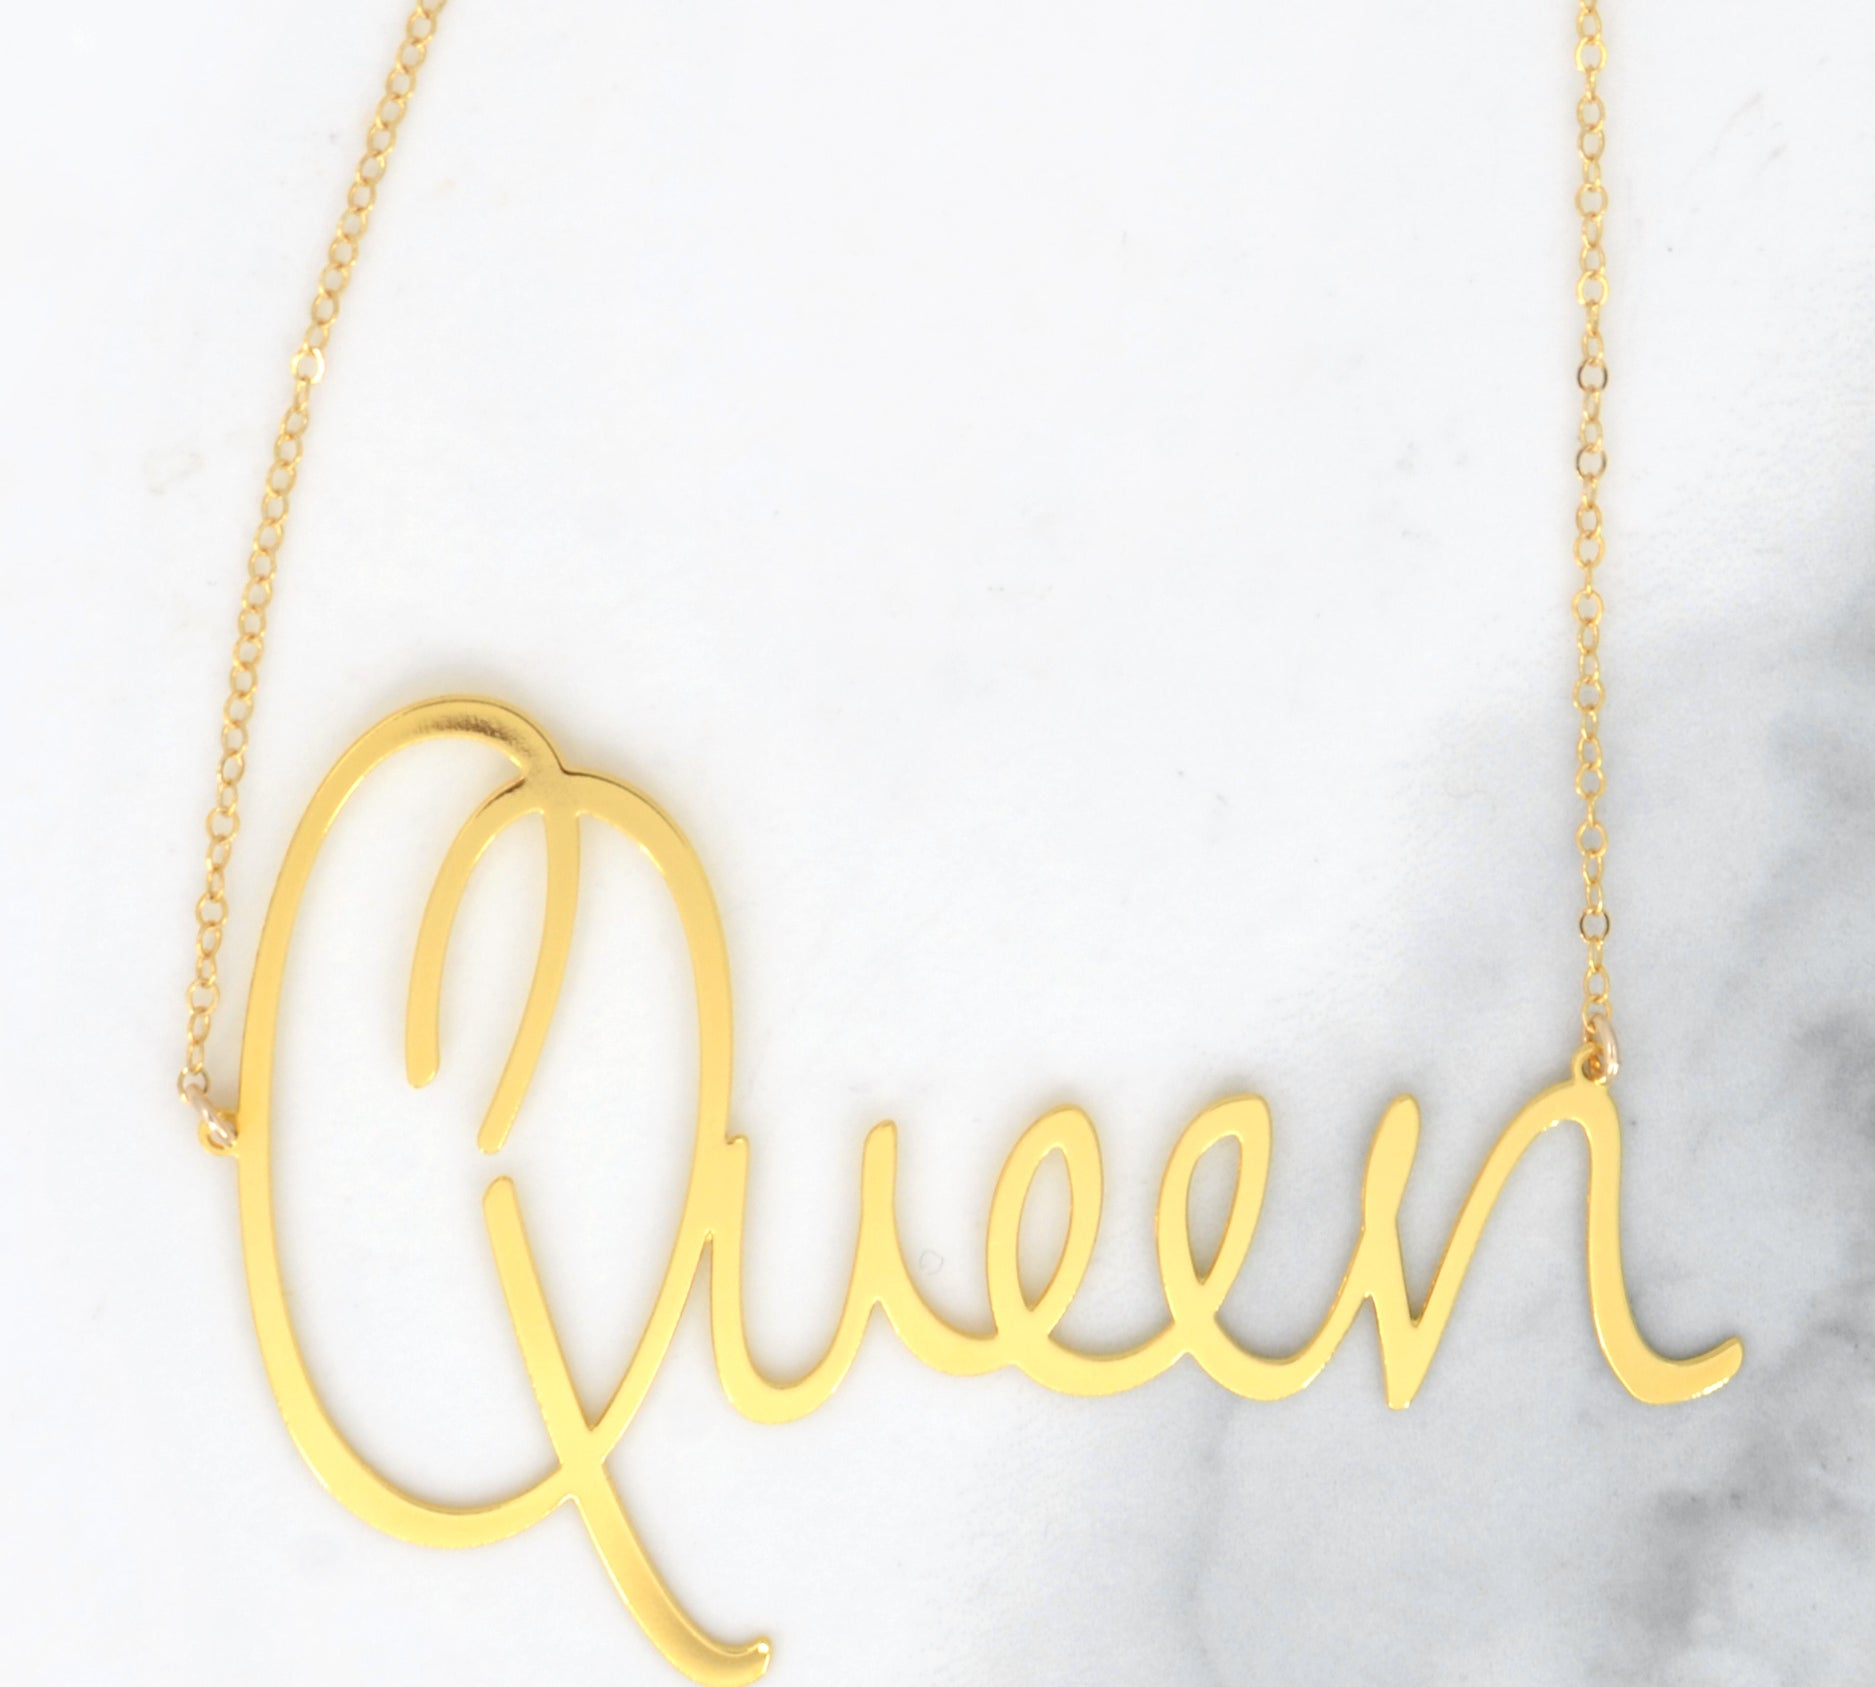 Queen Necklace - High Quality, Affordable, Hand Written, Empowering, Self Love, Mantra Word Necklace - Available in Gold and Silver - Small and Large Sizes - Made in USA - Brevity Jewelry